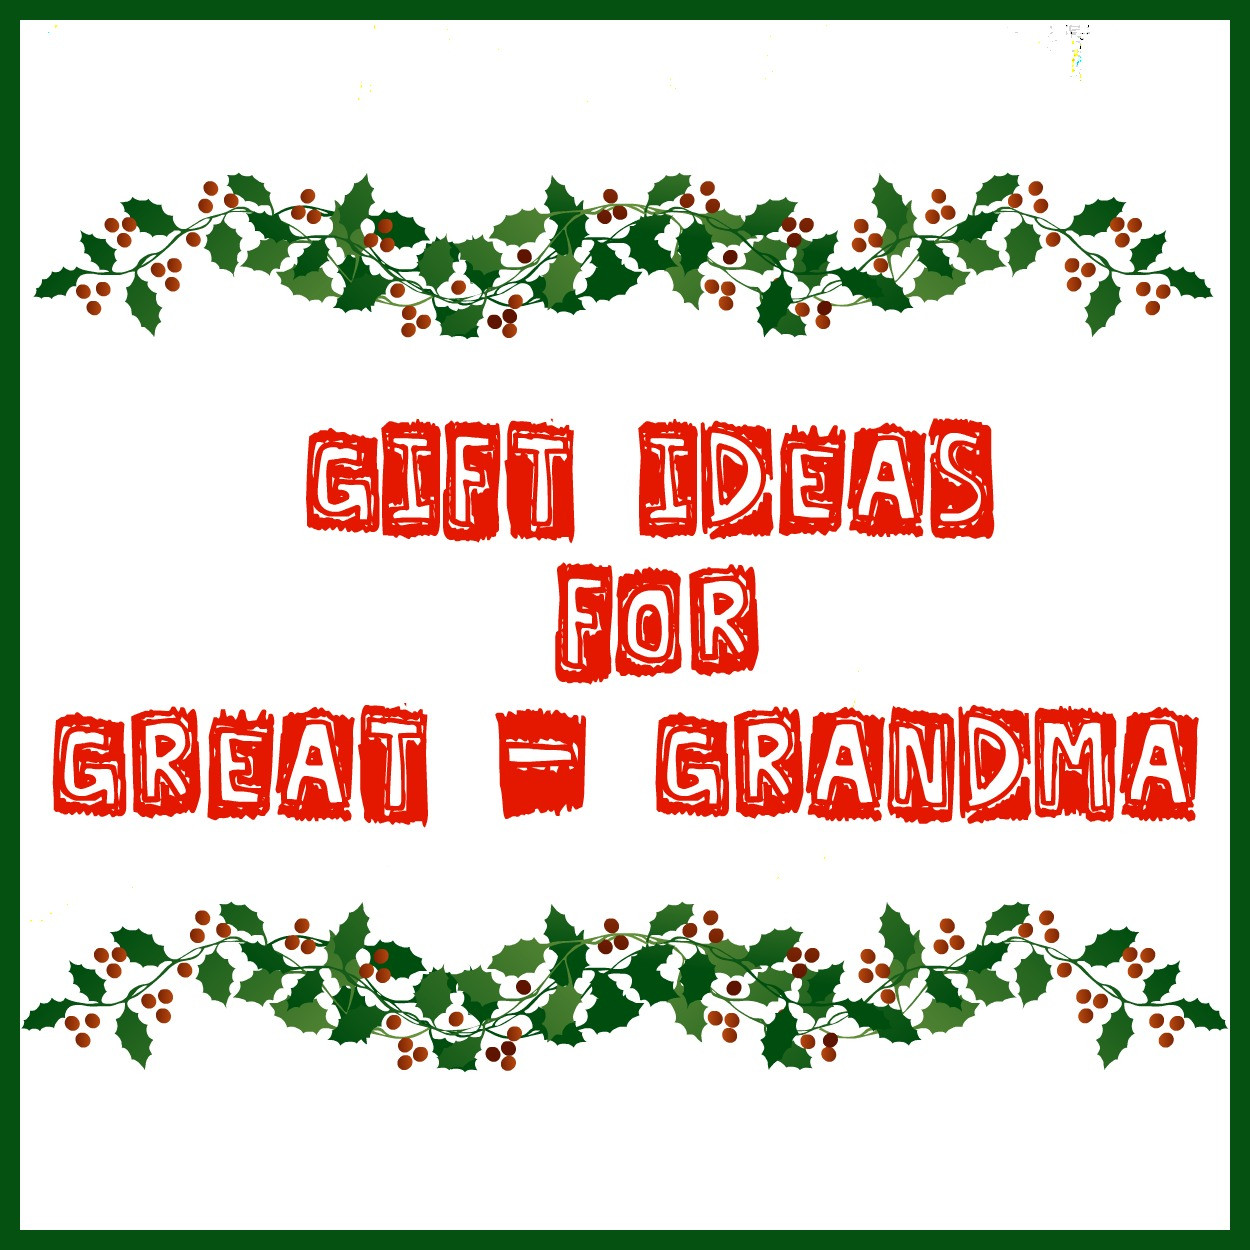 Gift Ideas For Grandmother
 The Bean Sprout Notes Gift Ideas for Great Grandma